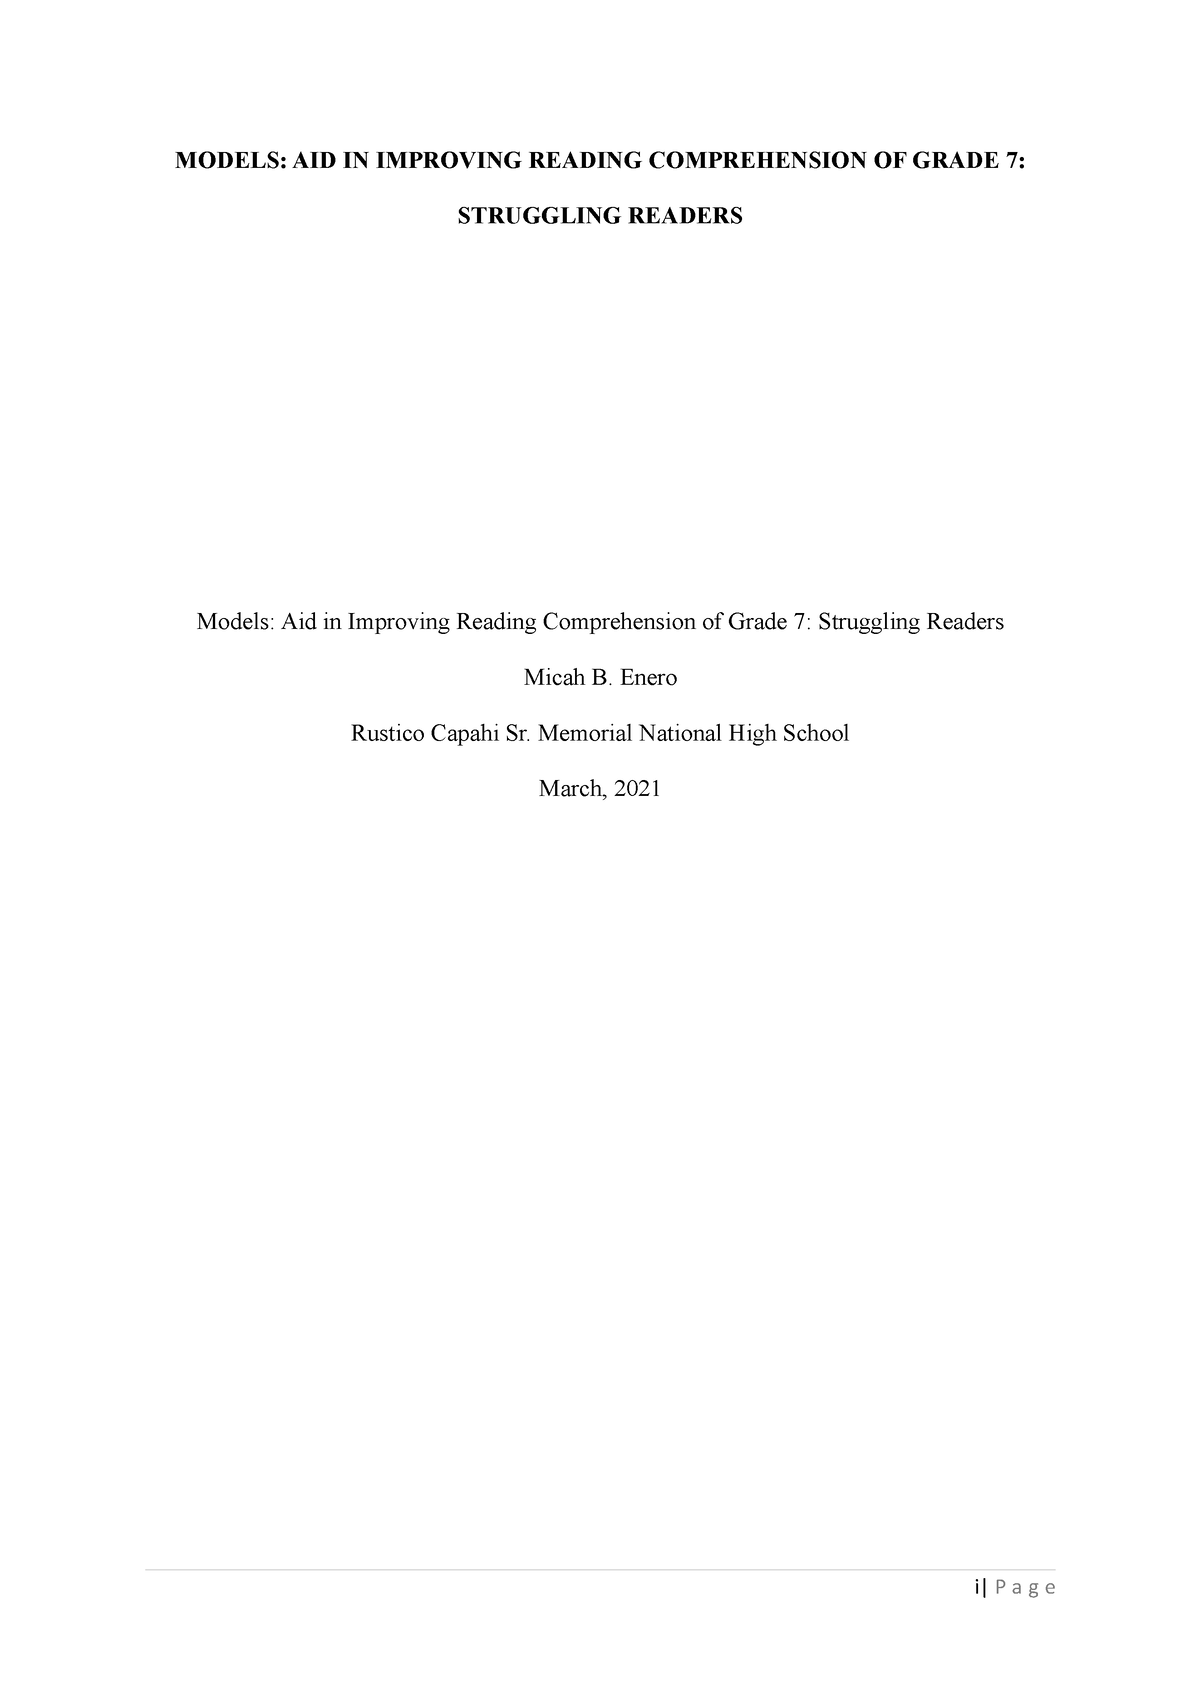 sample thesis title about reading comprehension